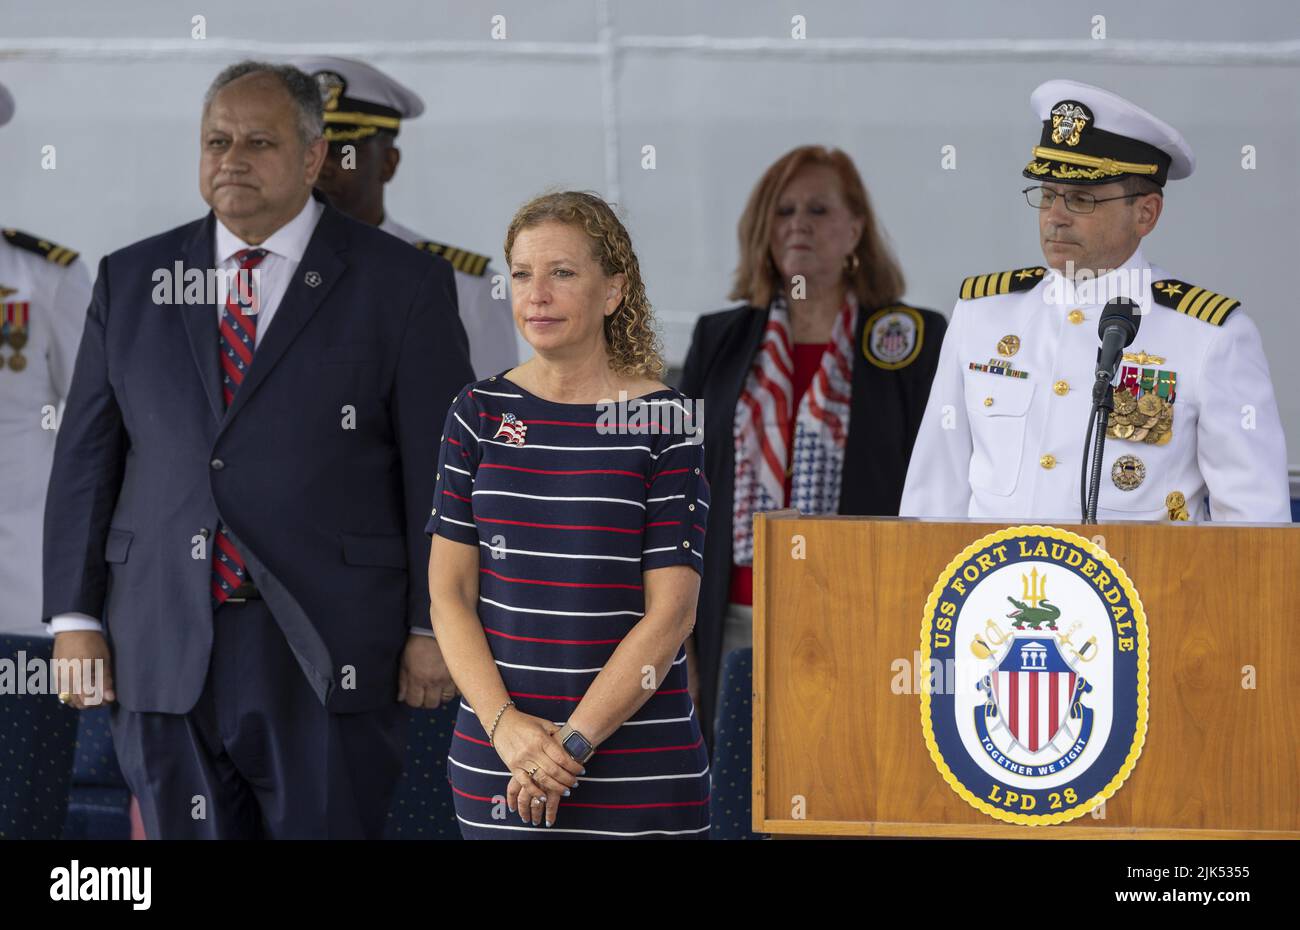 Fort Lauderdale, Florida, USA. 30th July, 2022. (L-R) Secretary of the Navy the Honorable Carlos Del Toro, U.S. Rep. Debbie Wasserman Schultz (FL-23) and Commanding Officer, Capt. James Quaresimo stand during the National Anthem at the commissioning ceremony for the USS Fort Lauderdale (LPD 28), Port Everglades, Florida.The USS Fort Lauderdale (LPC28) is a San Antonio-class amphibious transport dock ship. Credit: UPI/Alamy Live News Stock Photo